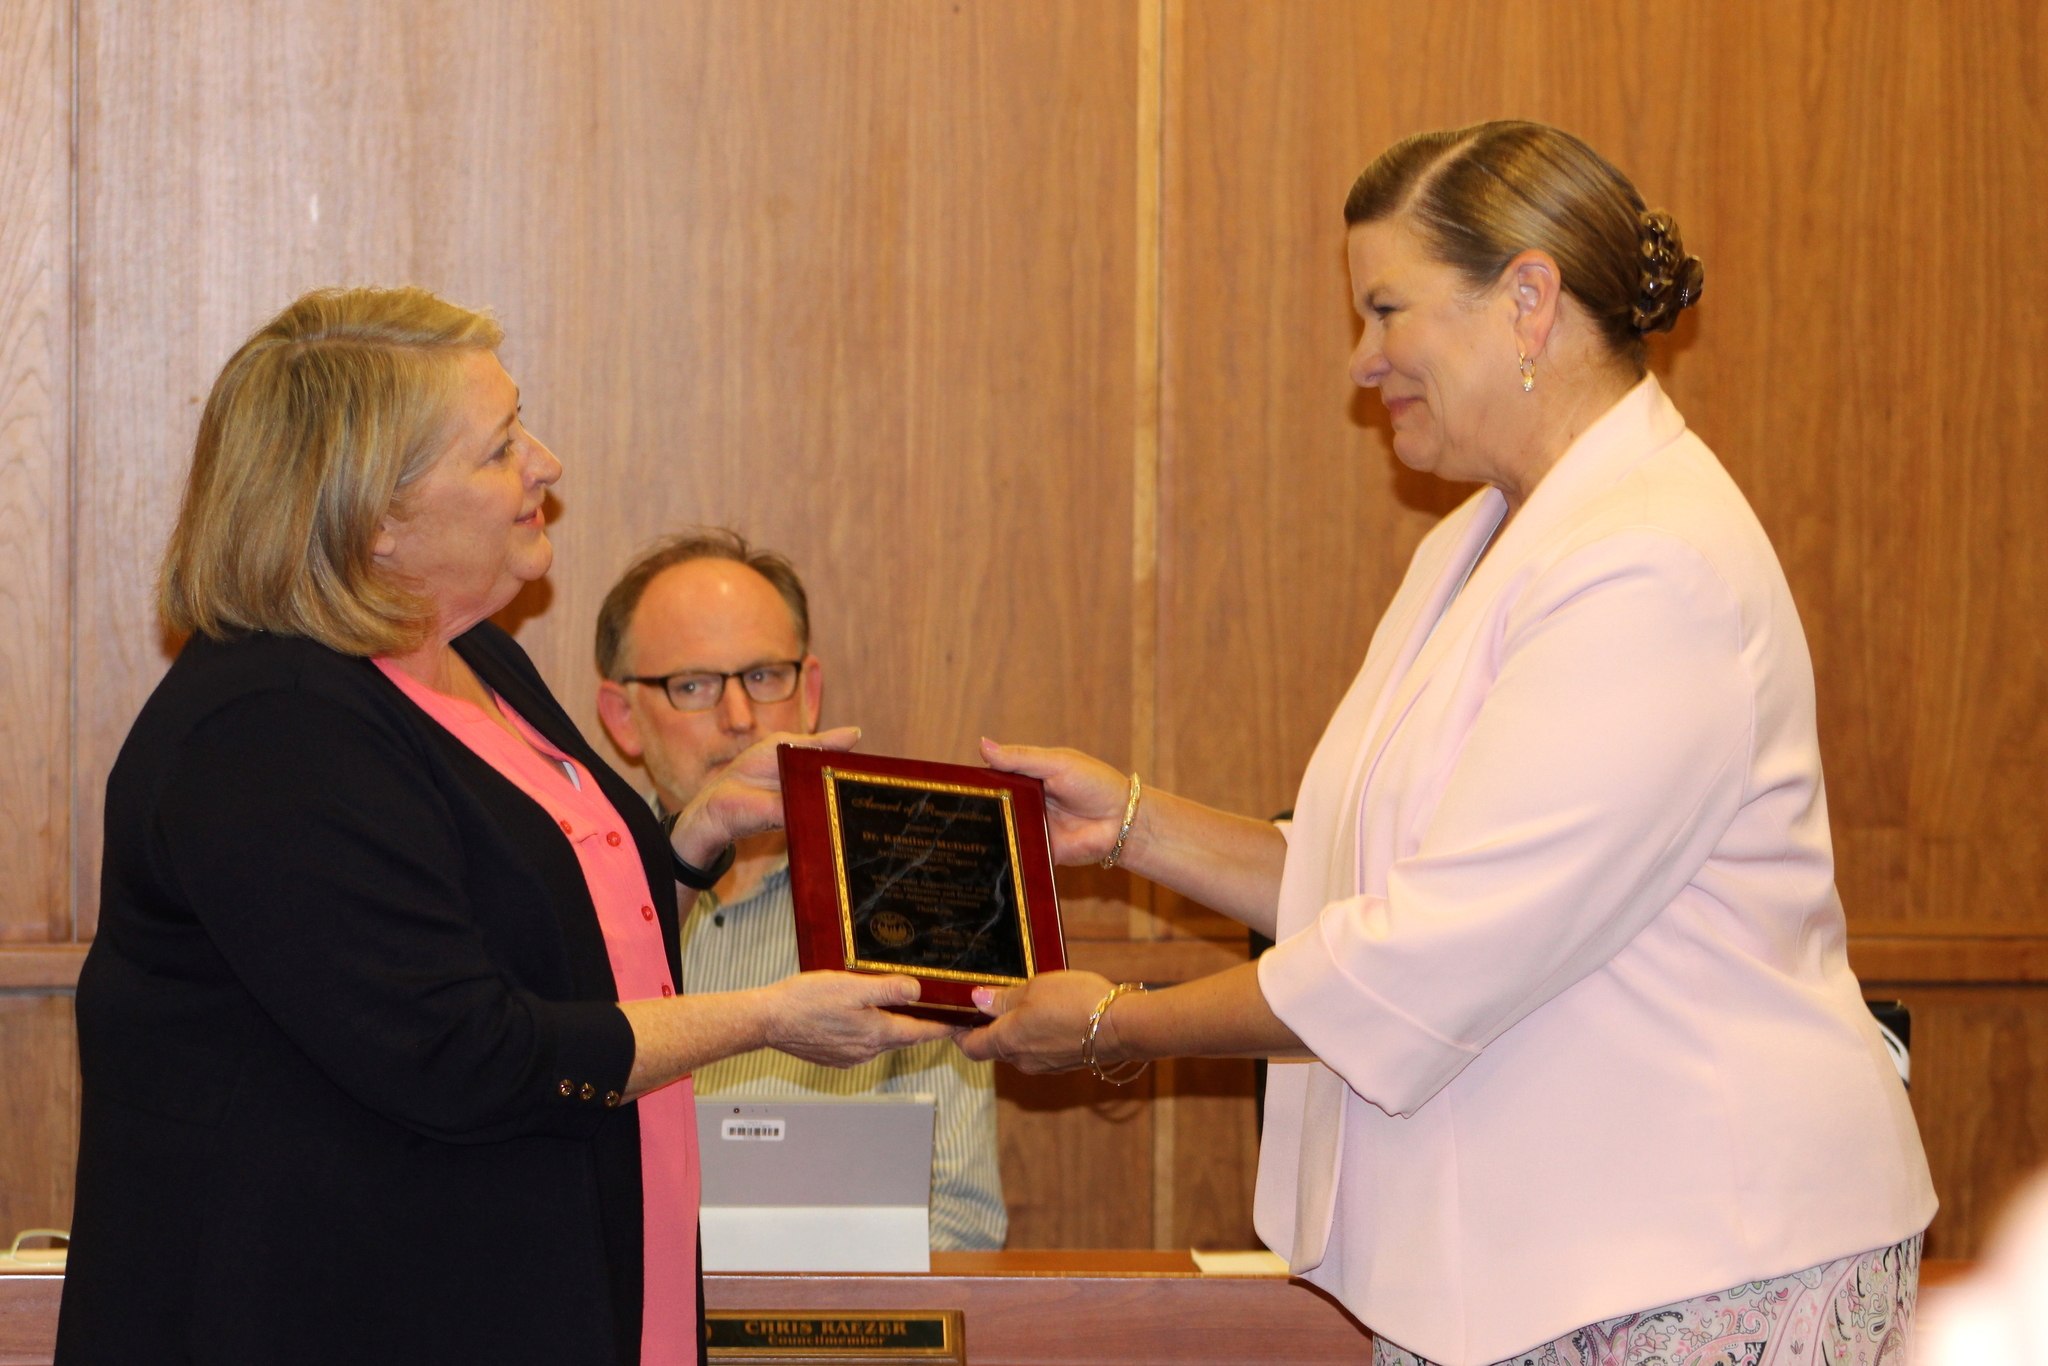 Kirk Boxleitner/Staff PhotoArlington Mayor Barbara Tolbert honors outgoing Arlington schools superintendent Kris McDuffy June 20 for her contributions to the community.